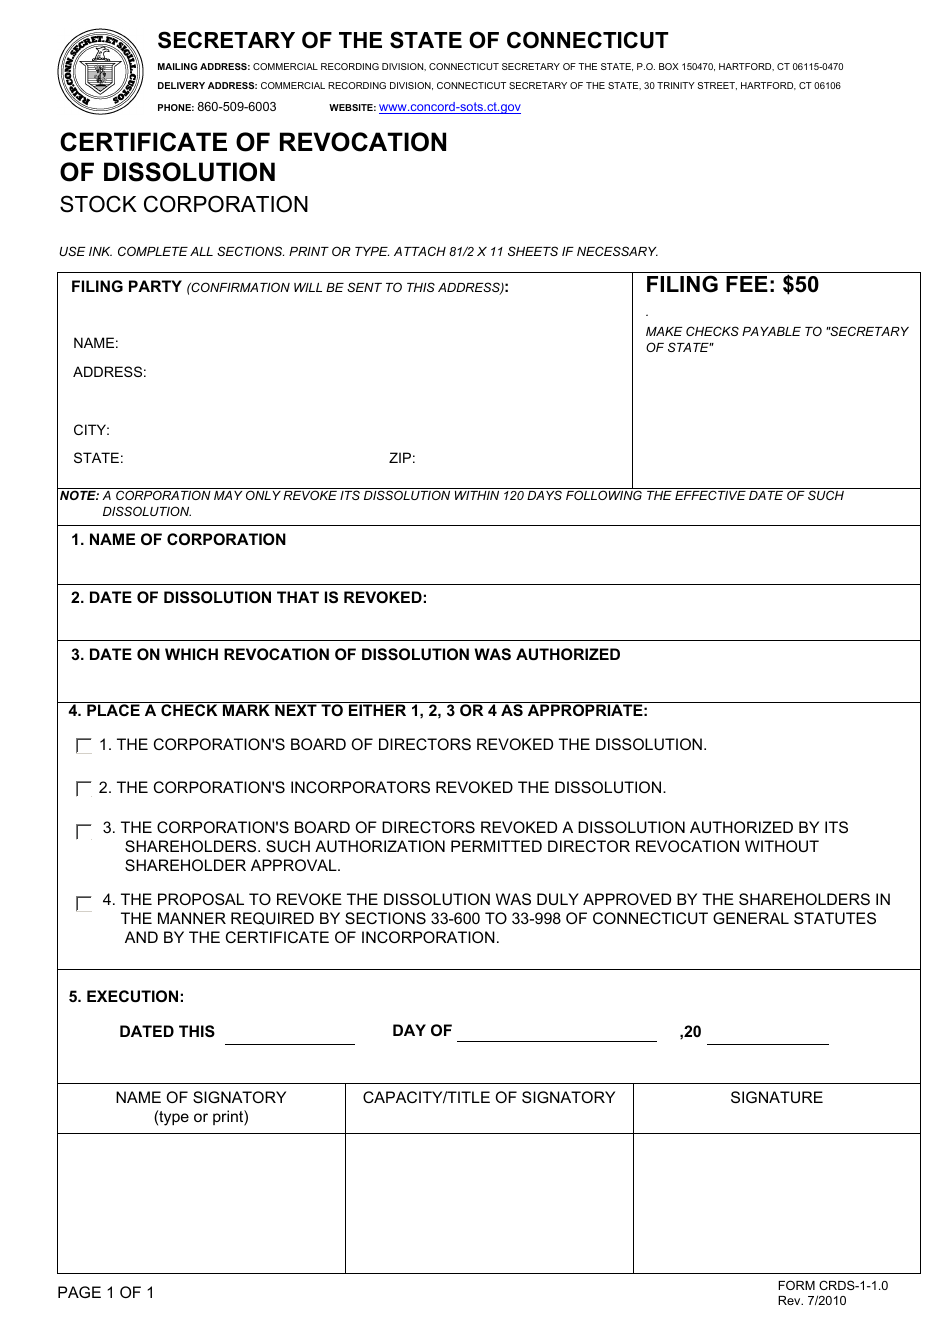 Form CRDS-1-1.0 Certificate of Revocation of Dissolution - Connecticut, Page 1